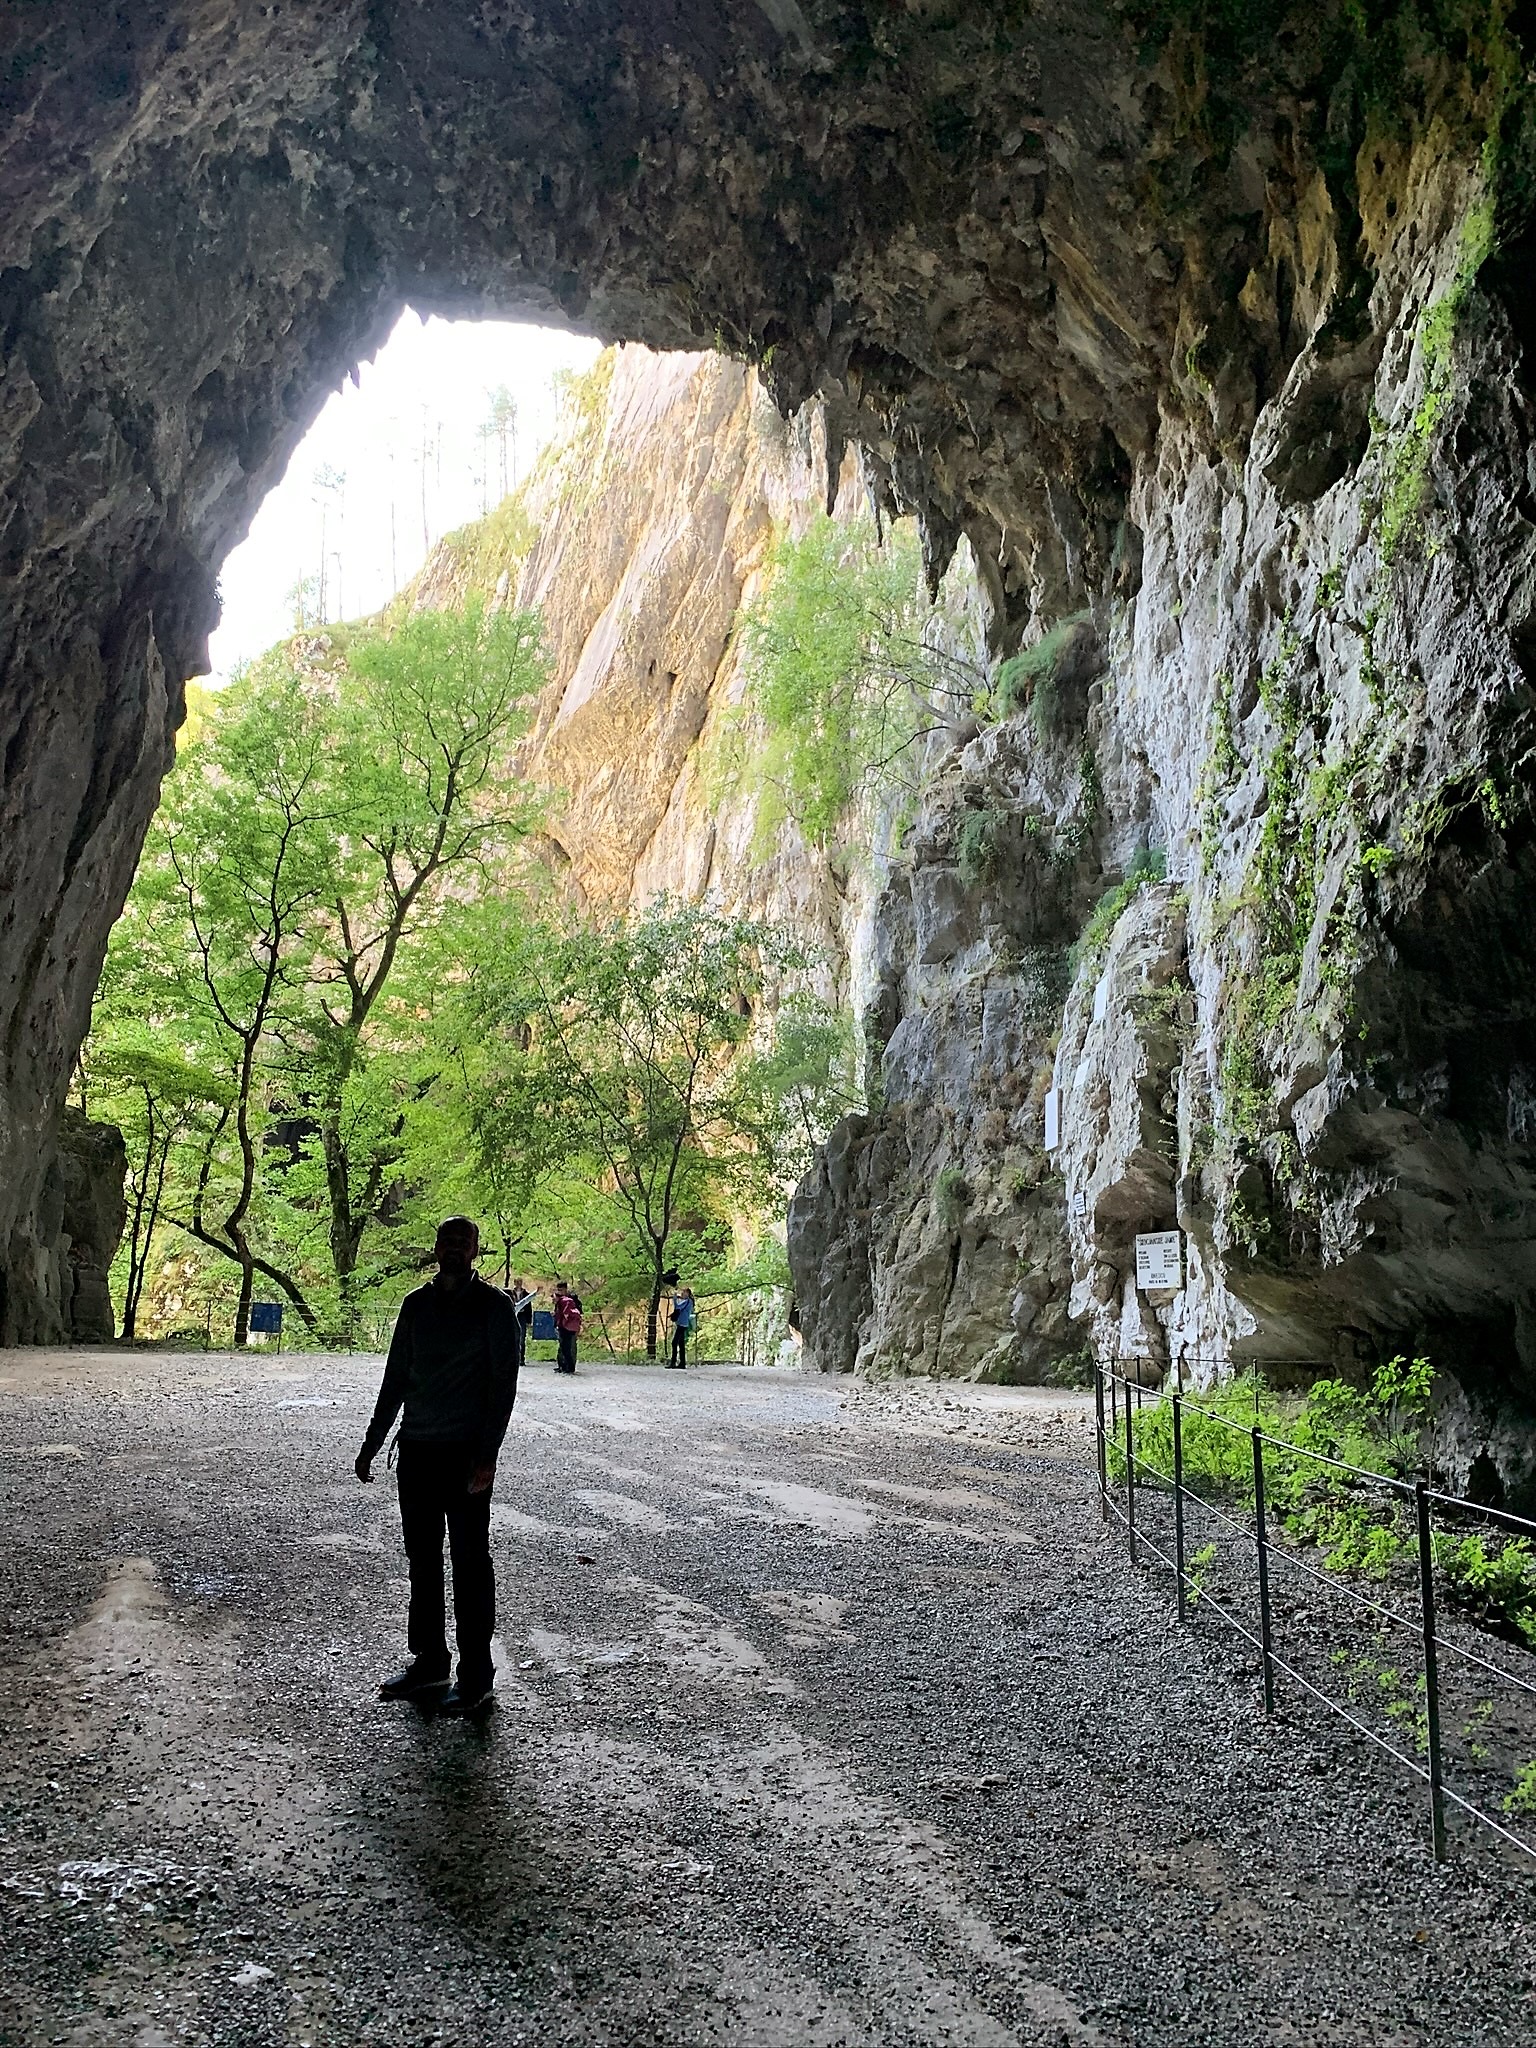 large cave opening with green trees and silhouette of man 